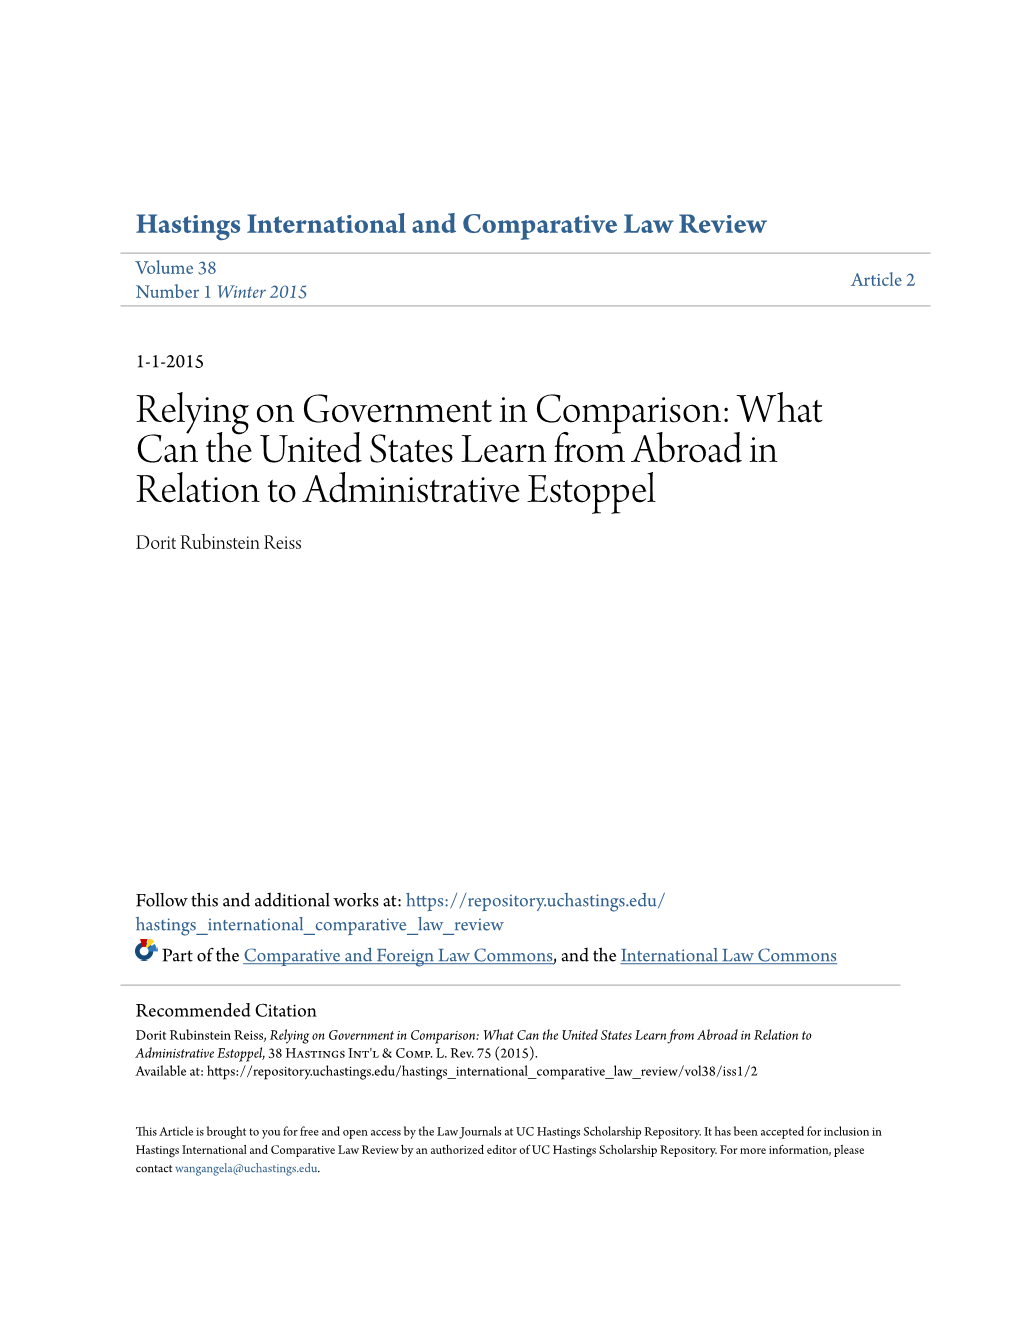 Relying on Government in Comparison: What Can the United States Learn from Abroad in Relation to Administrative Estoppel Dorit Rubinstein Reiss